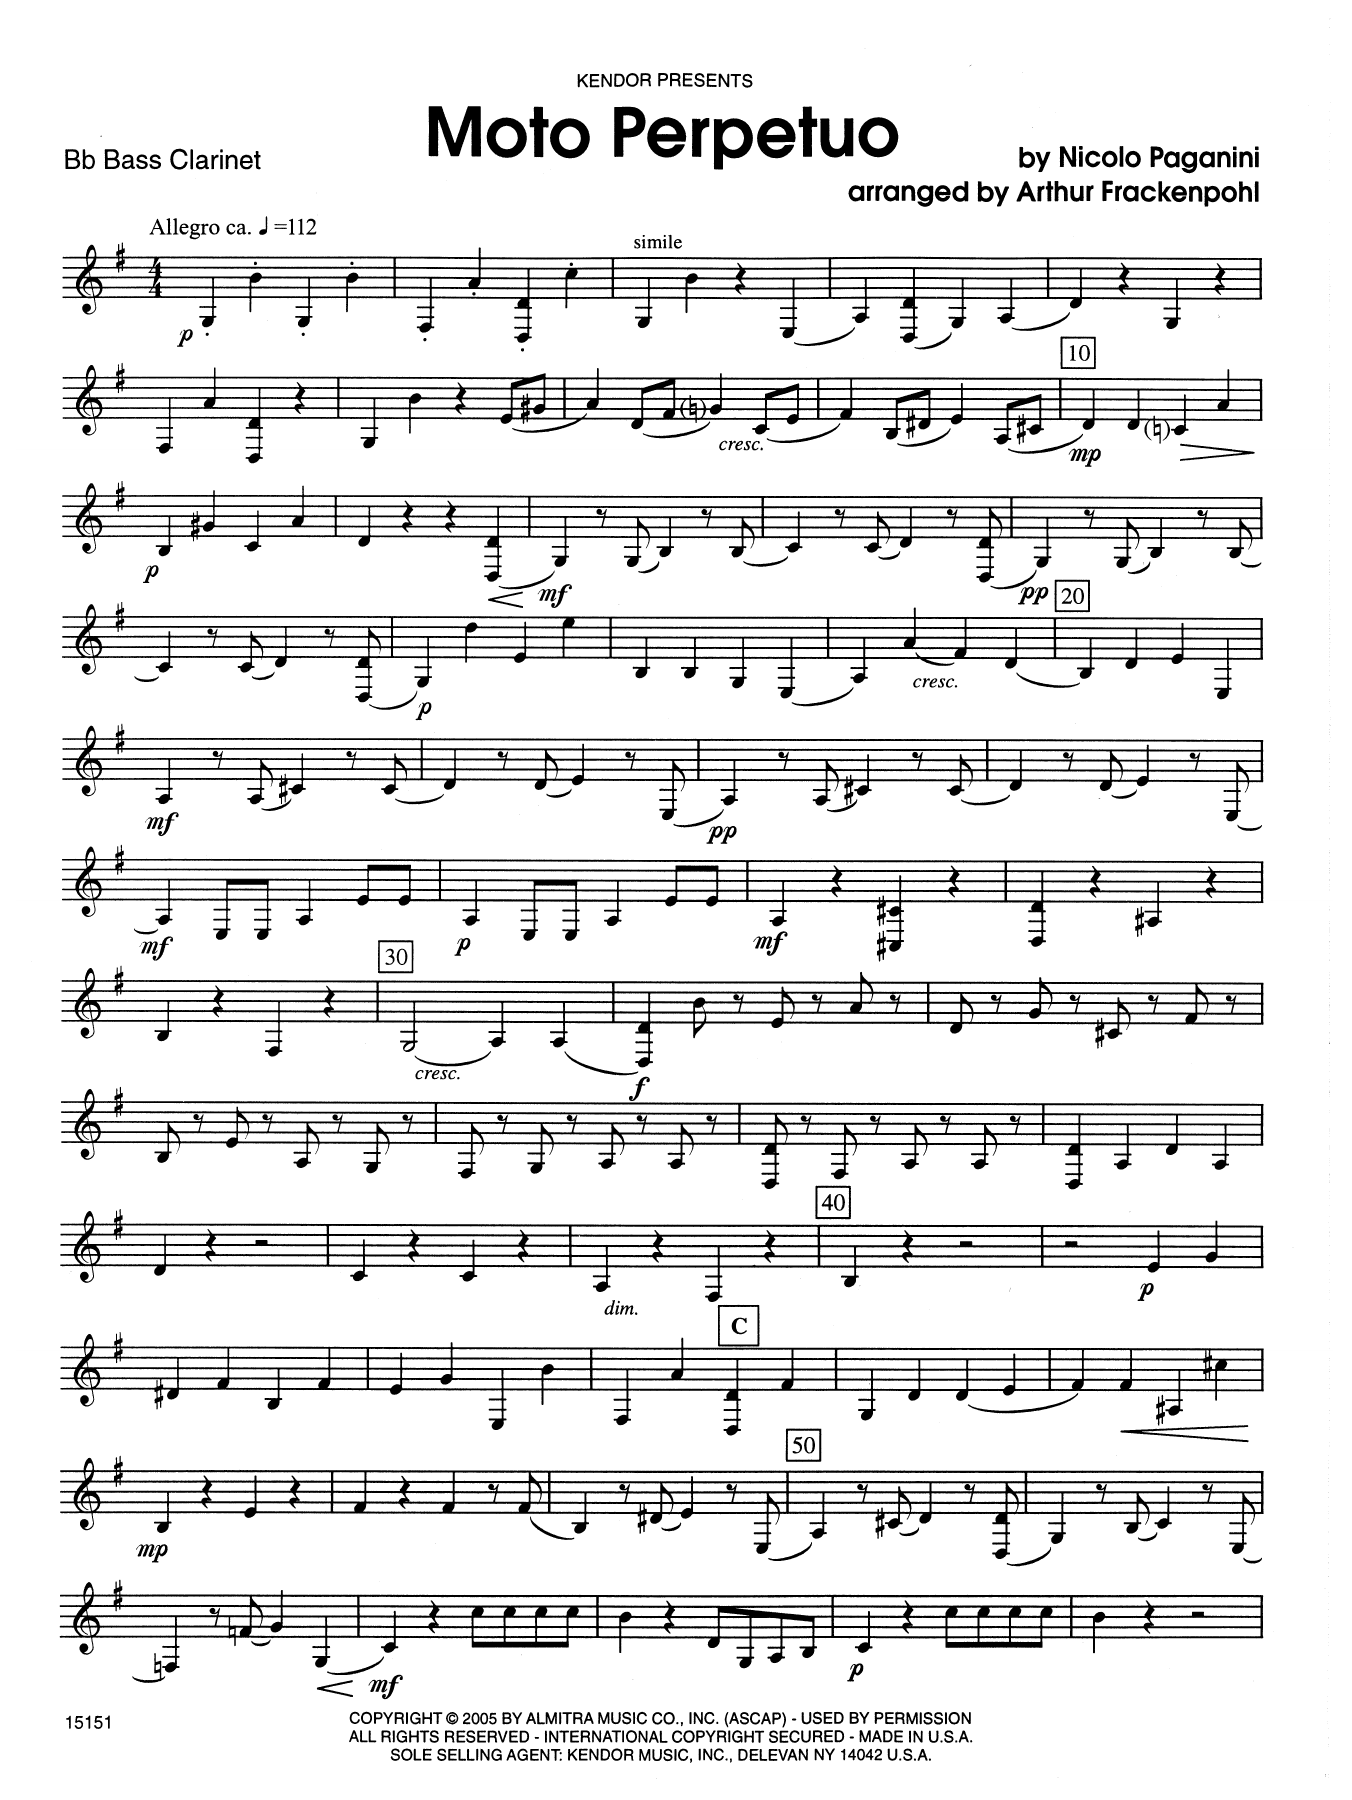 Arthur Frackenpohl Moto Perpetuo - Bb Bass Clarinet sheet music notes and chords. Download Printable PDF.